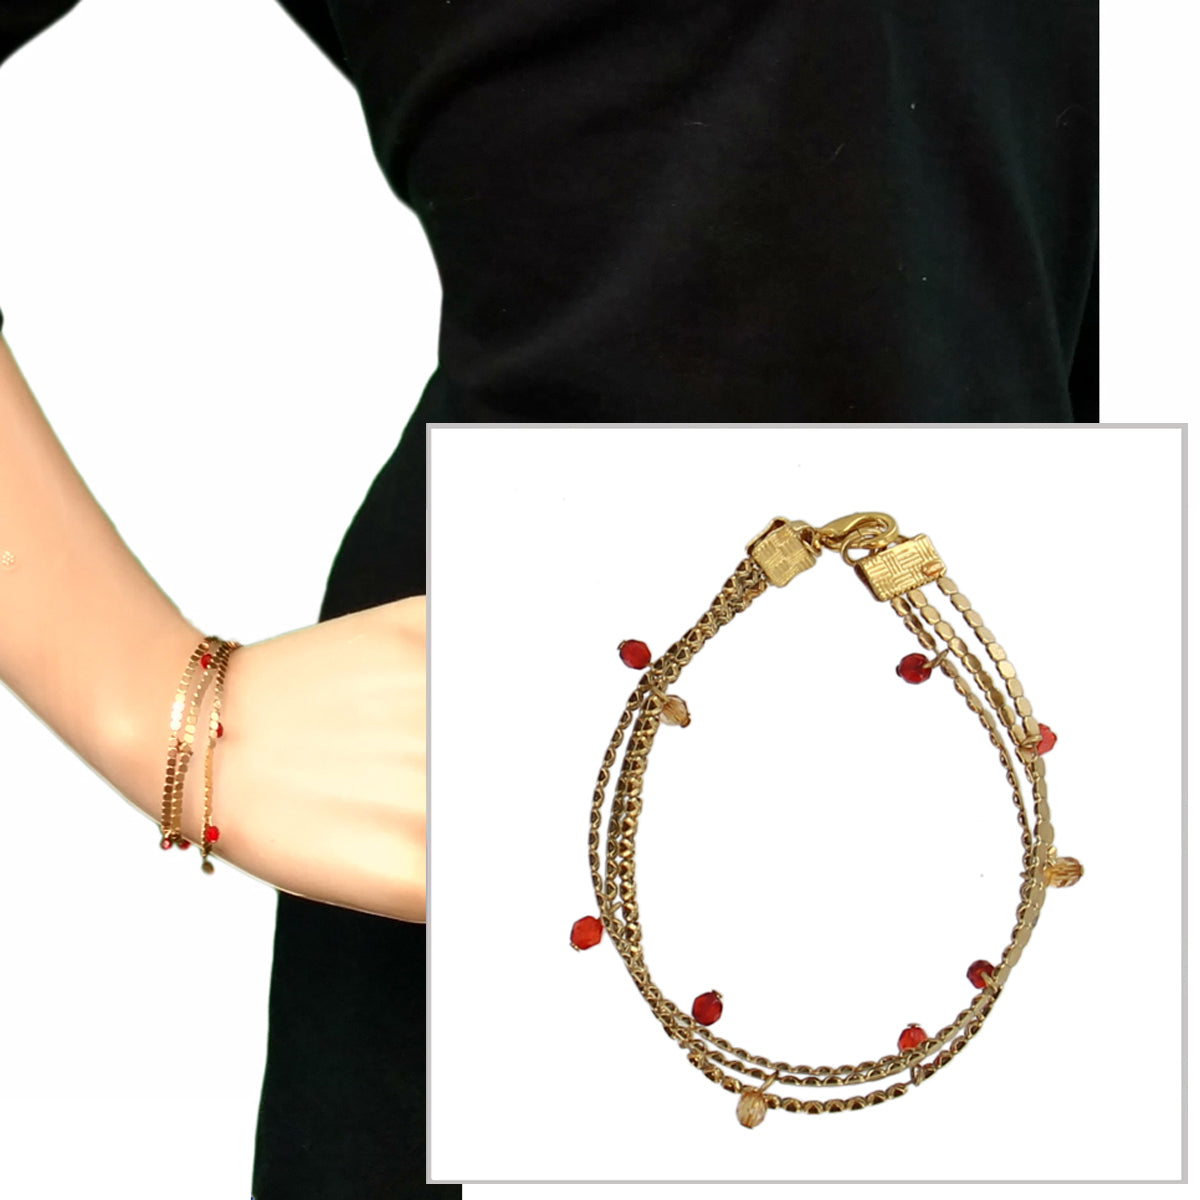 Multi Strand Gold Tone Red Beaded Chain Bracelet Back To School Jewelry 6"